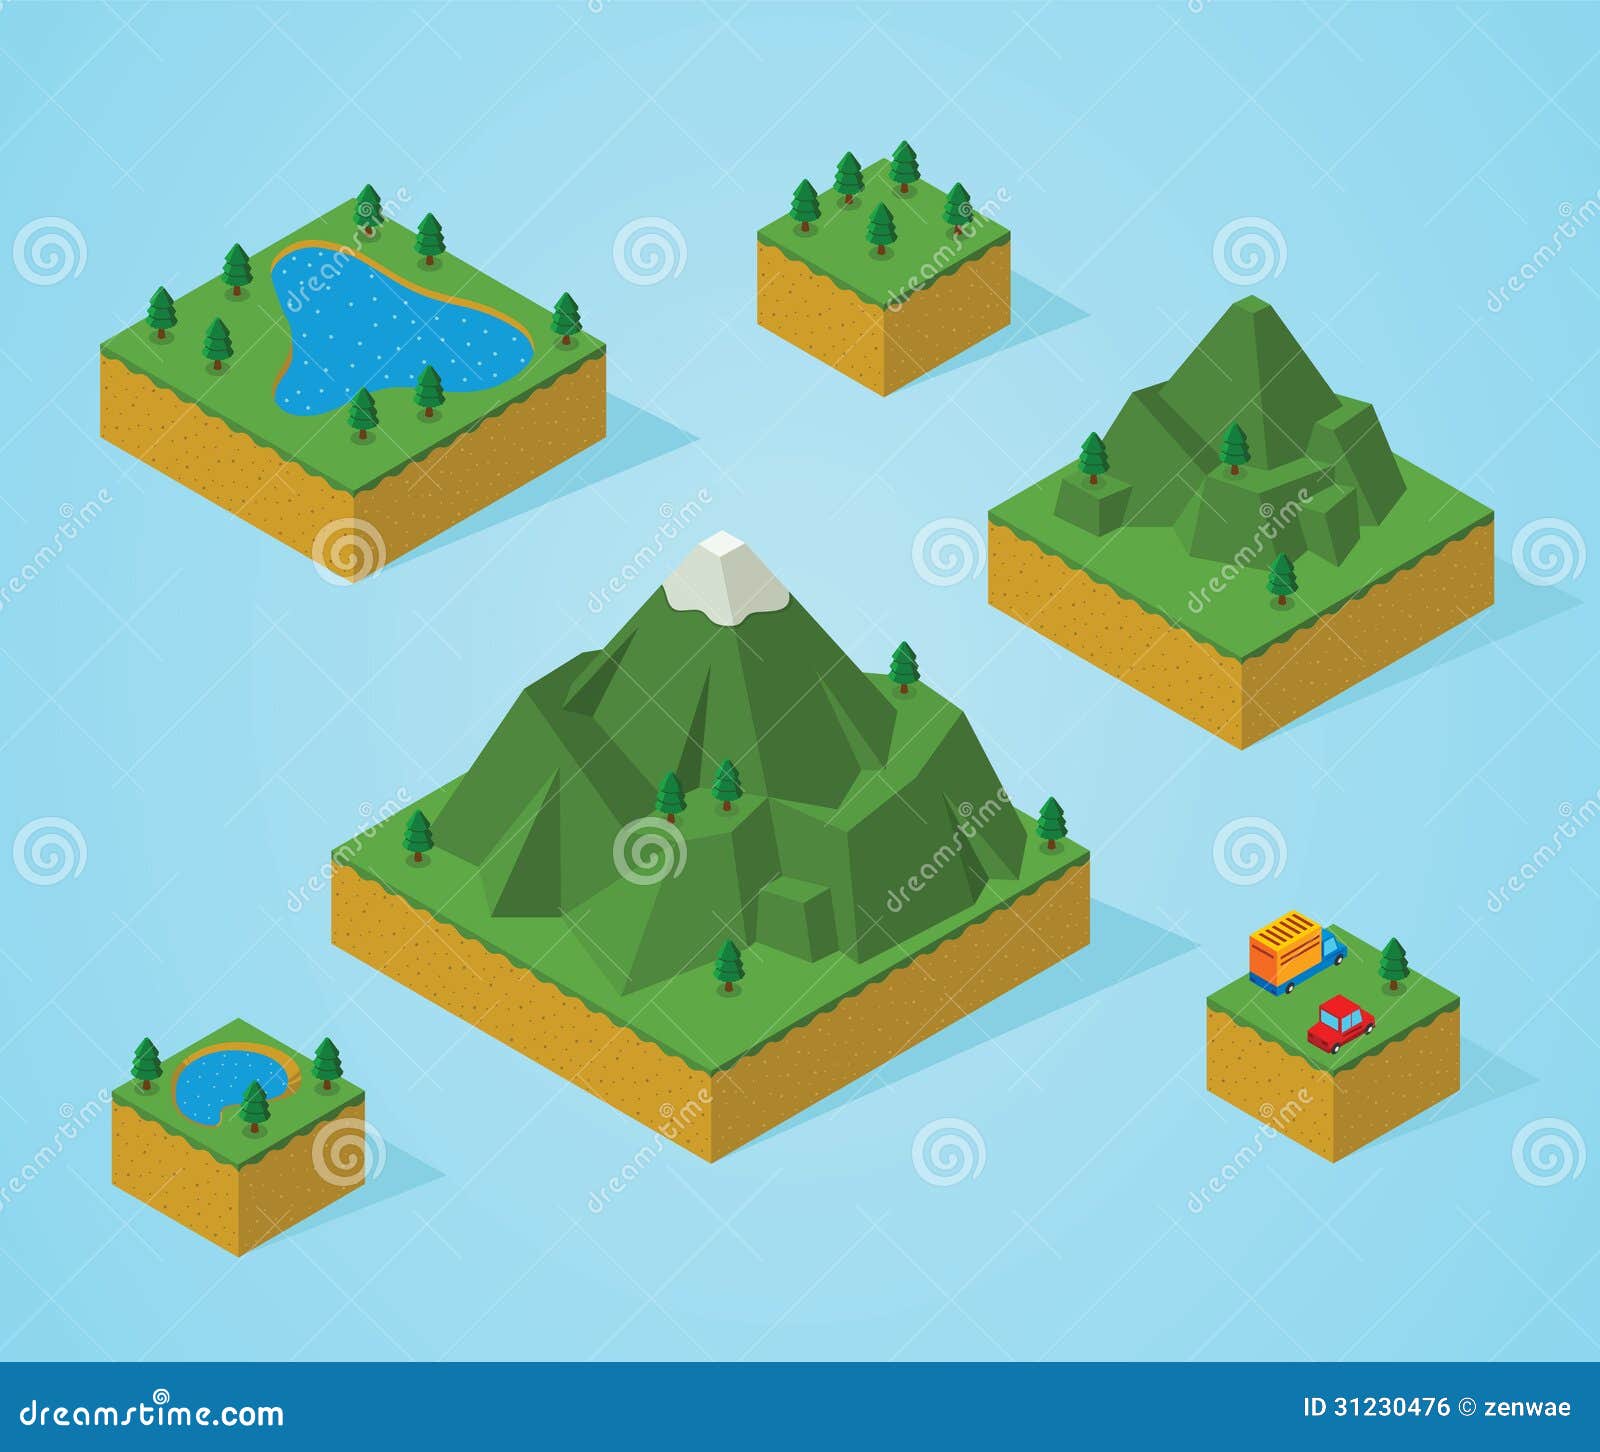 pre assembly isometric map-mountain